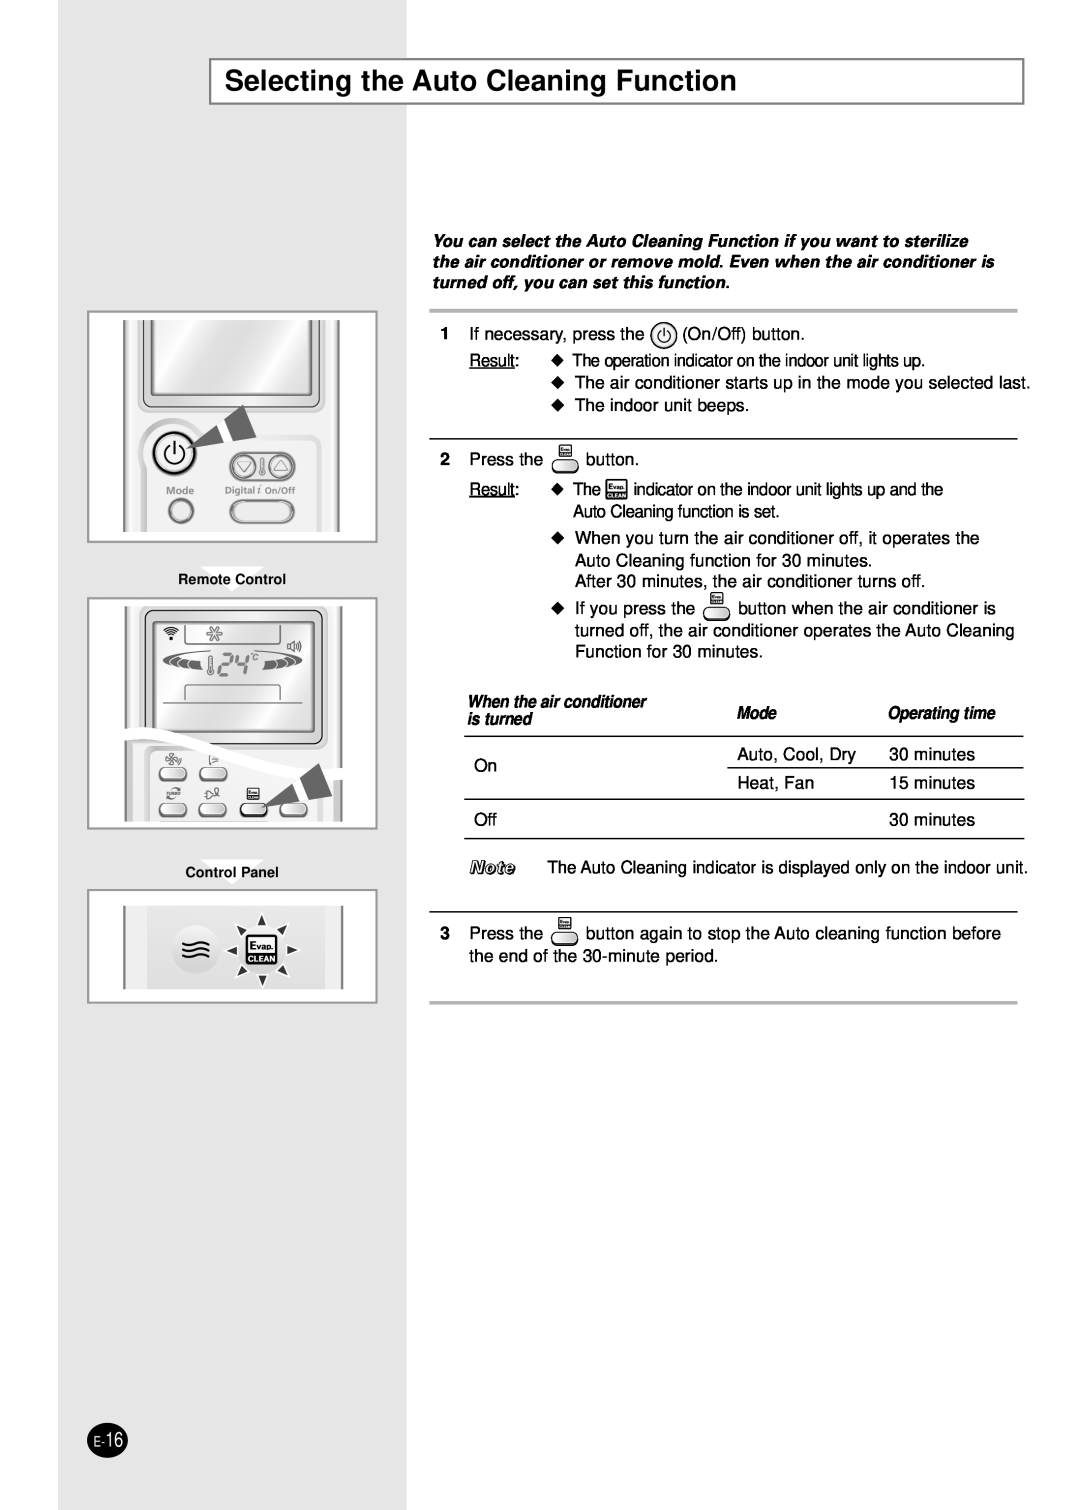 Samsung AS24HPBN/XFO manual Selecting the Auto Cleaning Function, When the air conditioner, Mode, Operating time, is turned 